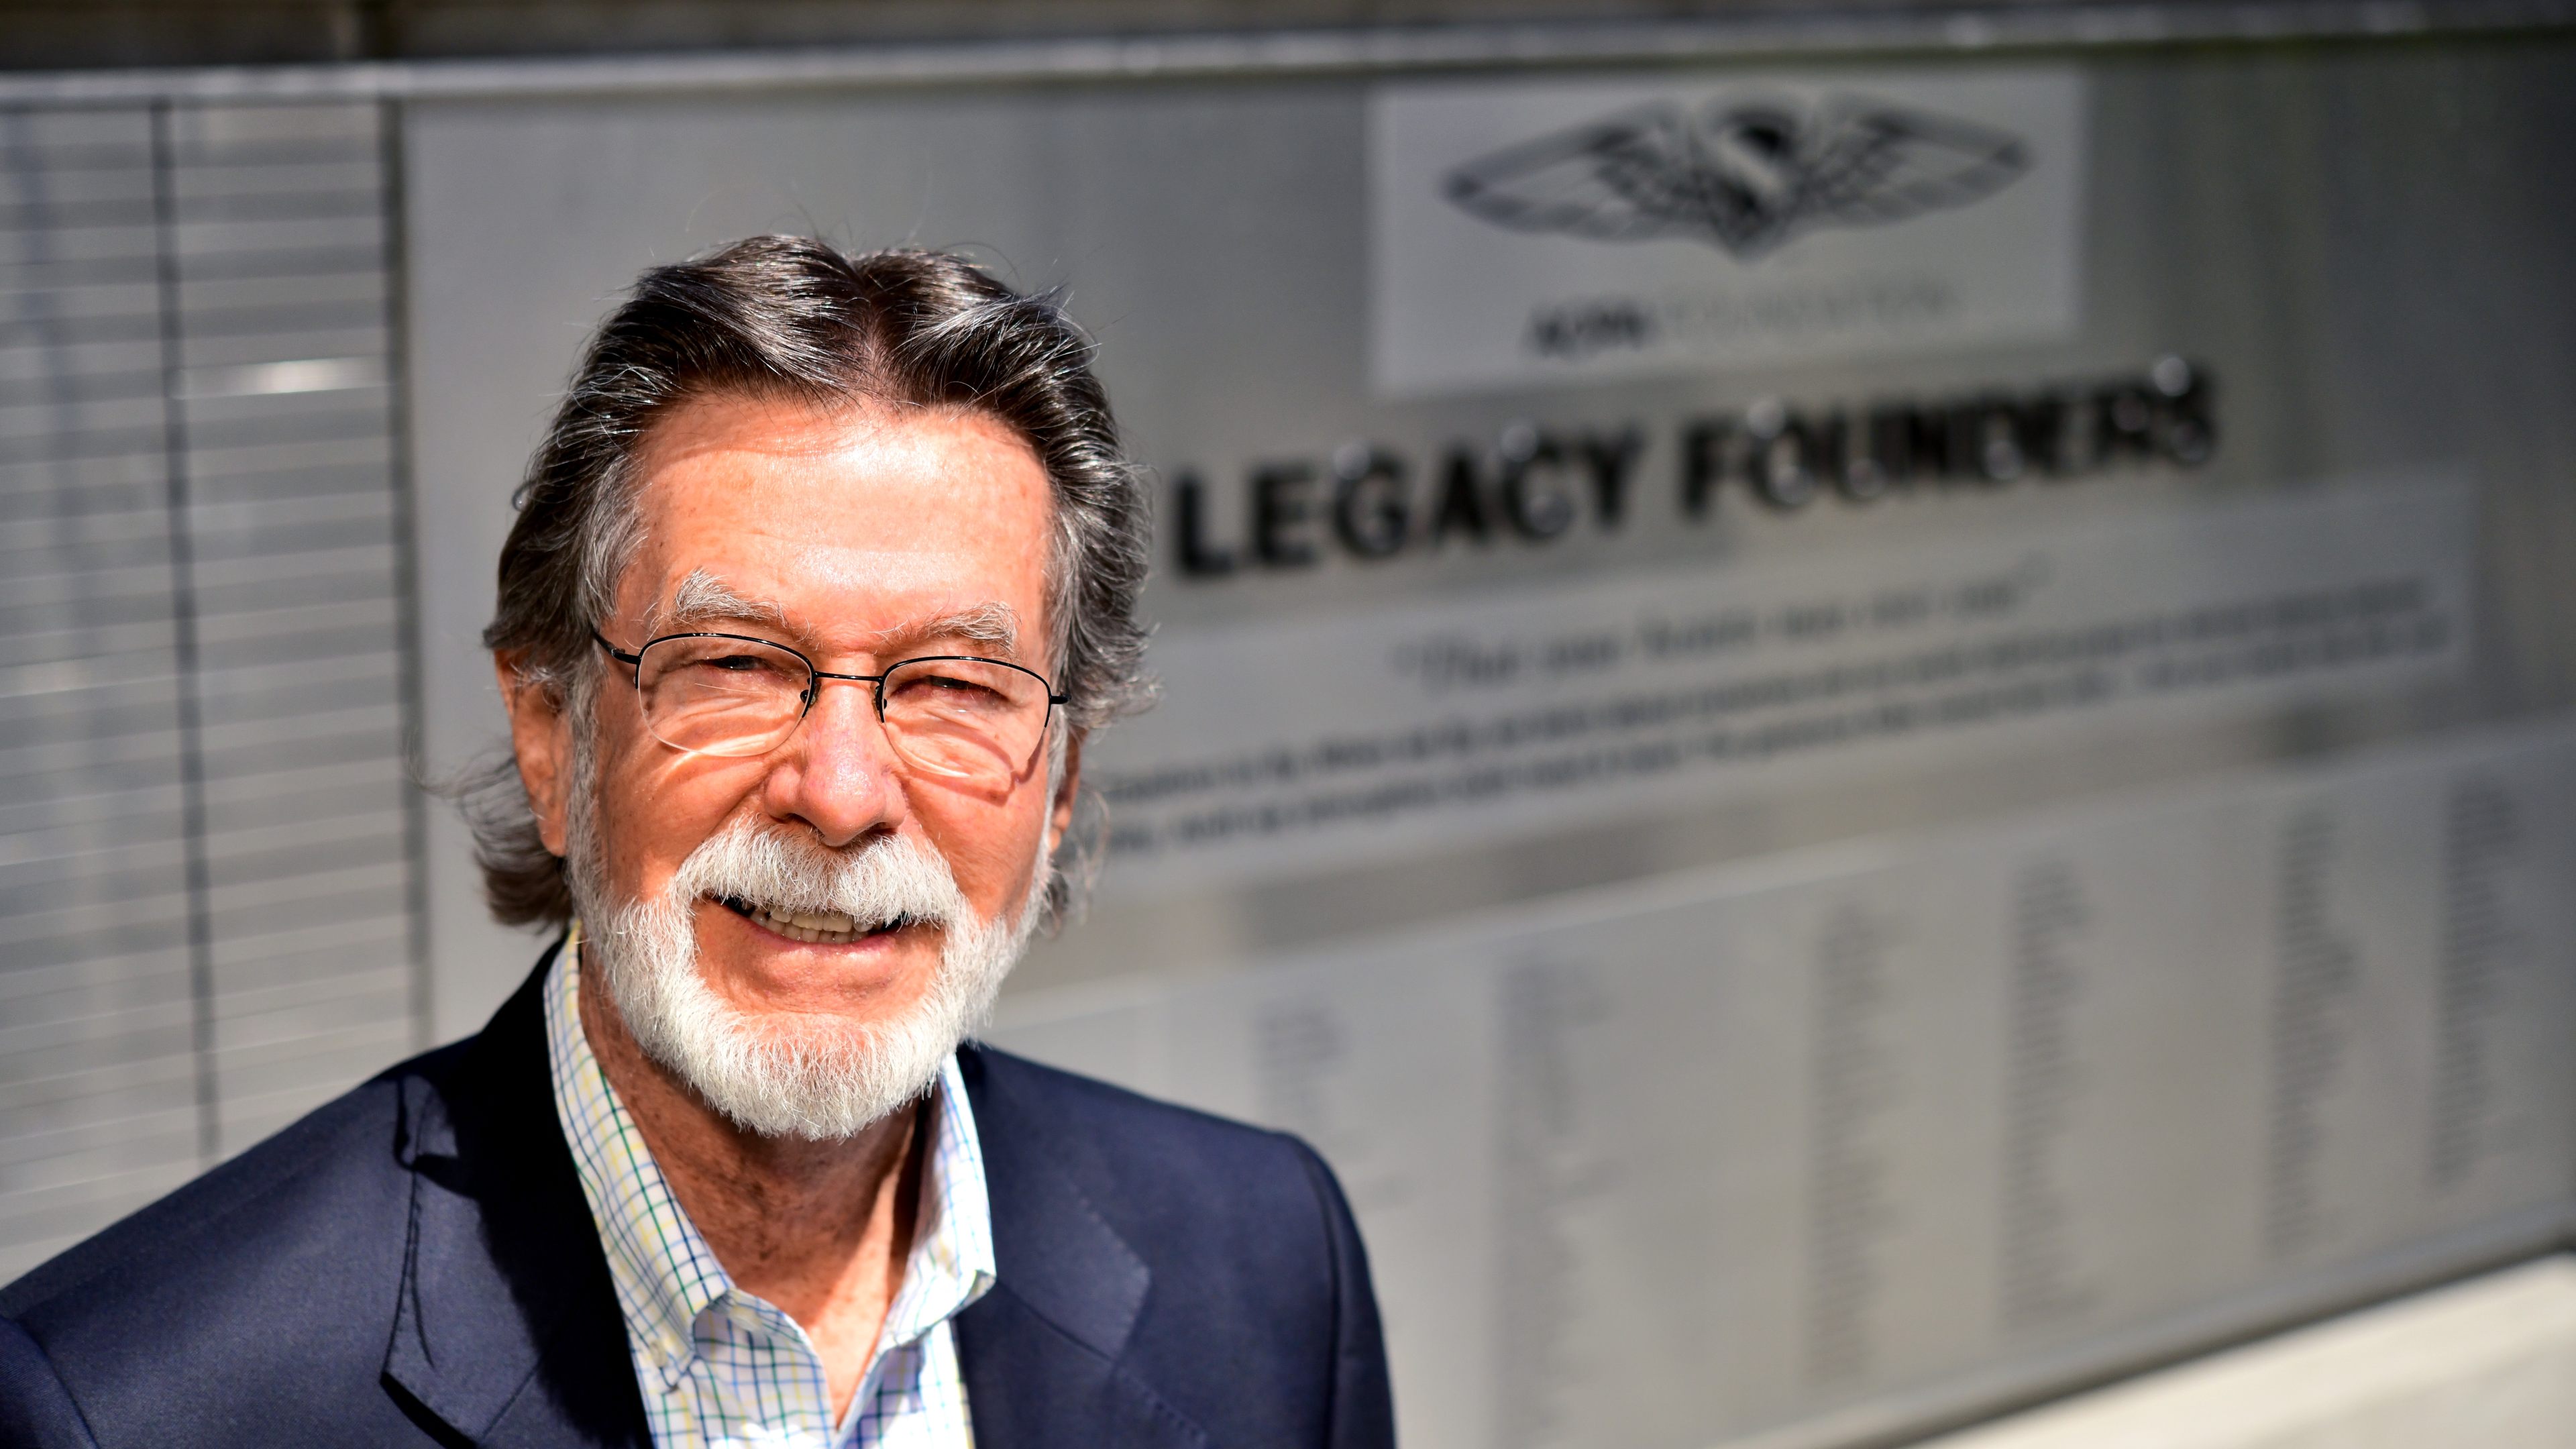 AOPA member Ed McNeil, a supporter of the AOPA Legacy Society, stands in the new Legacy Plaza at AOPA headquarters in Frederick, Maryland. Photo by Mike Collins.